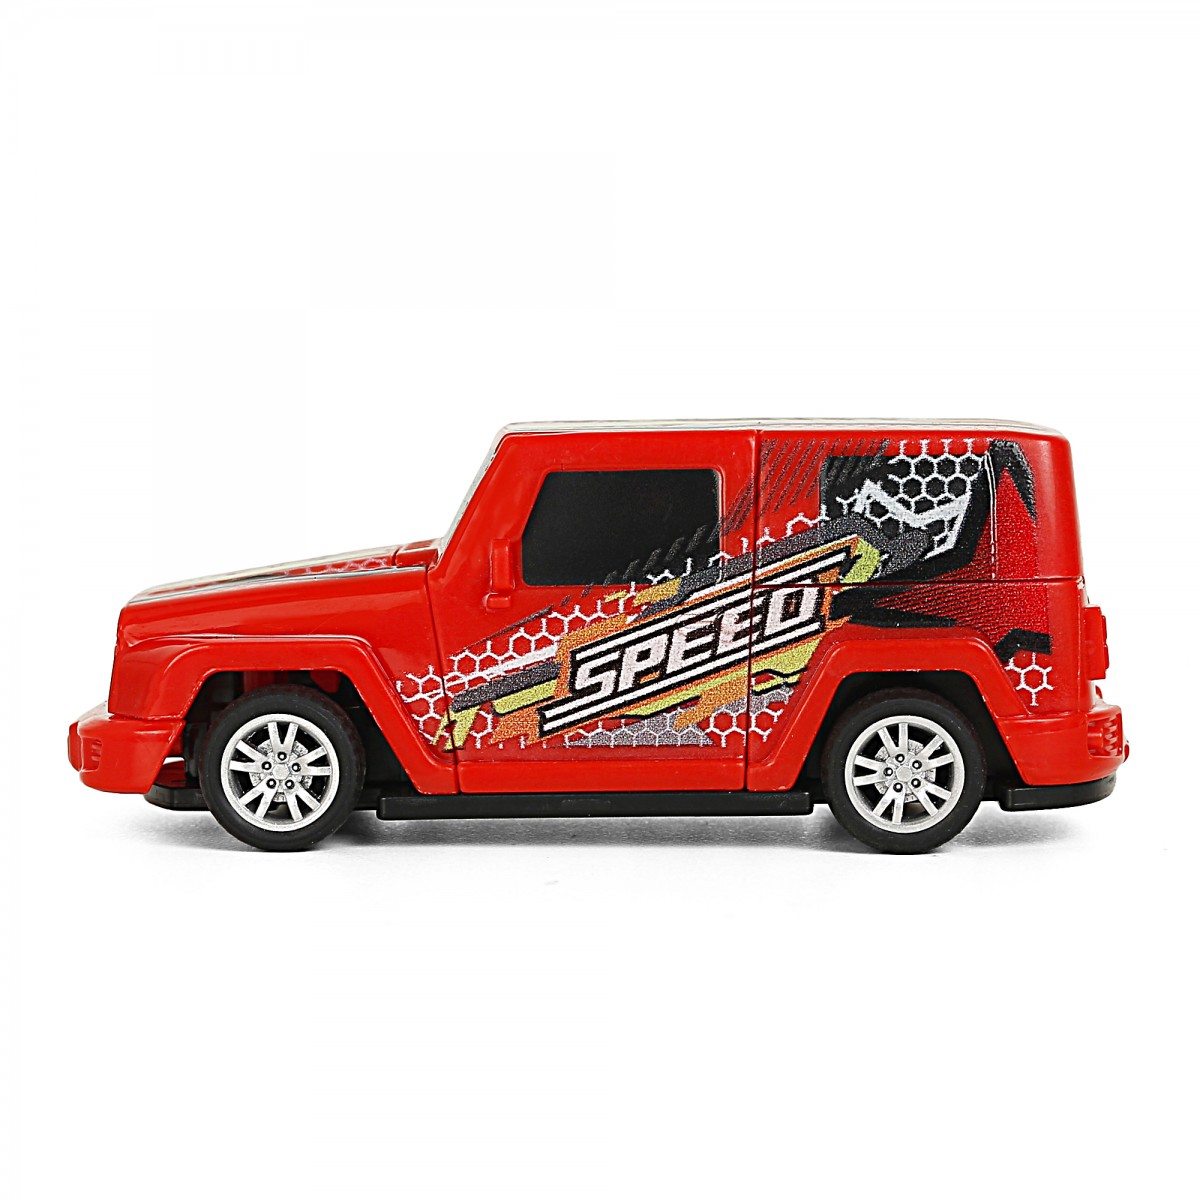 Ralleyz Pull Back Crash Car, 2 Modes Racing Stunt Vehicle Toy, Crash Car, Racing Toy, Friction High Speed Car, Kids for 3Y+, Red